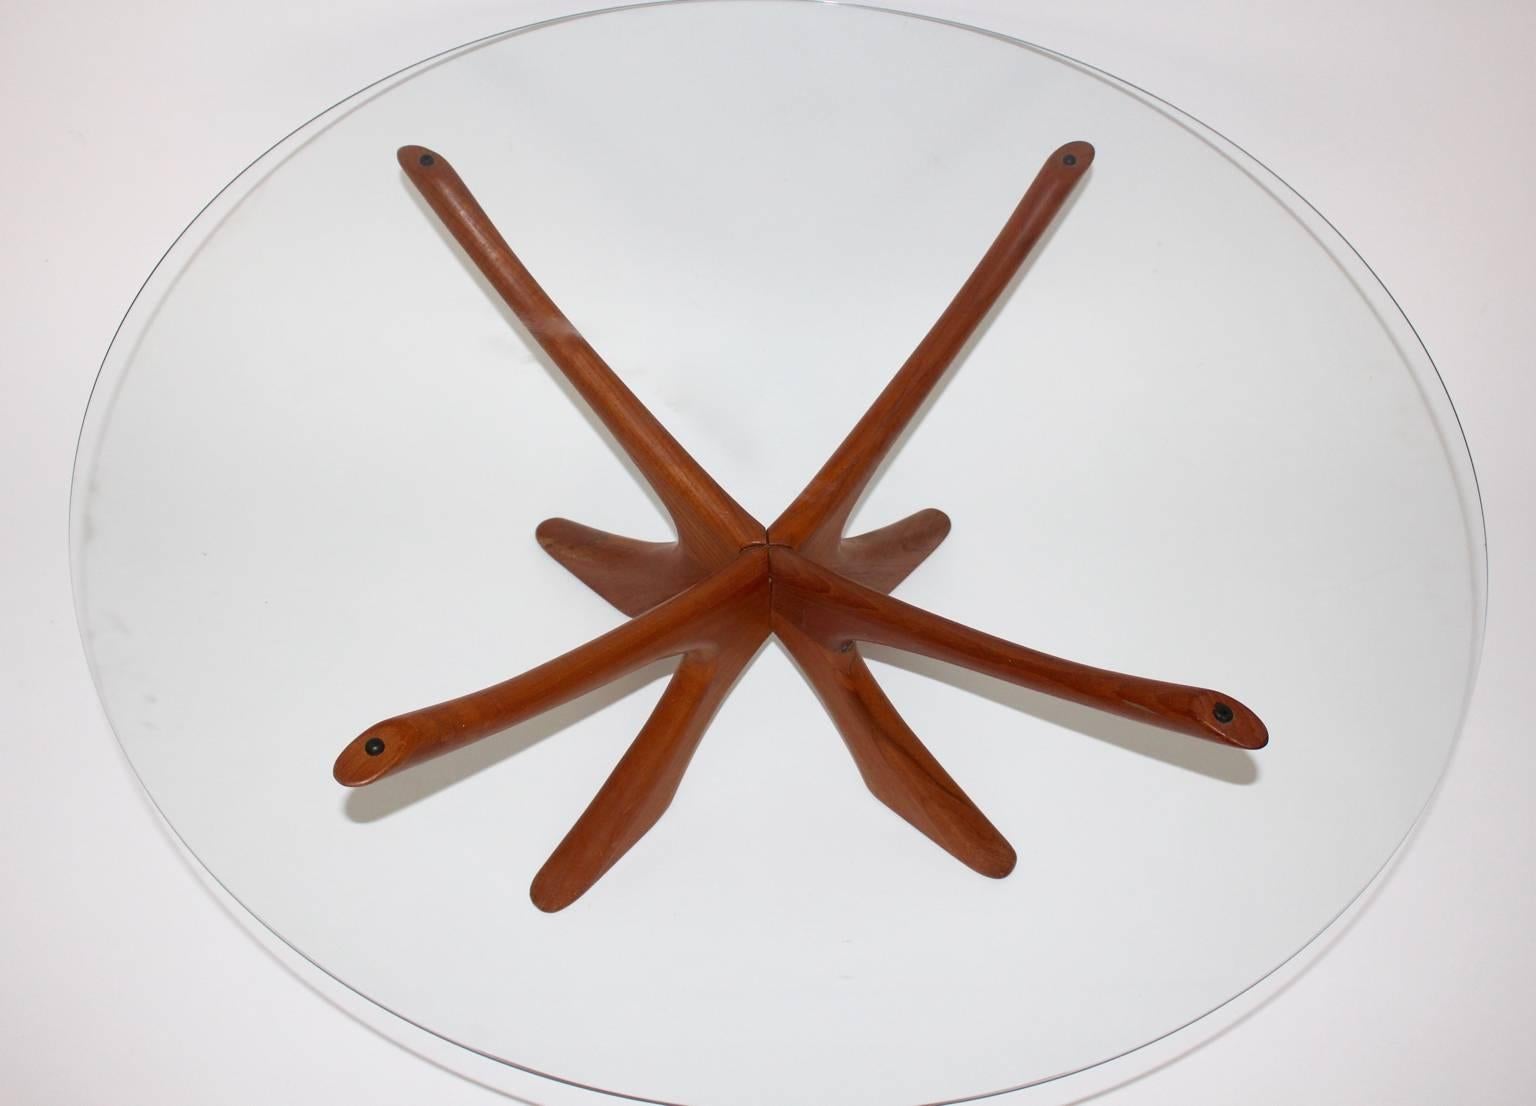 Mid century modern teak coffee table in sculptural form designed by Illum Wikkelso in Denmark, circa 1960.
The table base was made out of teak wood  and topped with a clear glass plate.
The vintage condition is very good.
approx. measures:
Diameter: